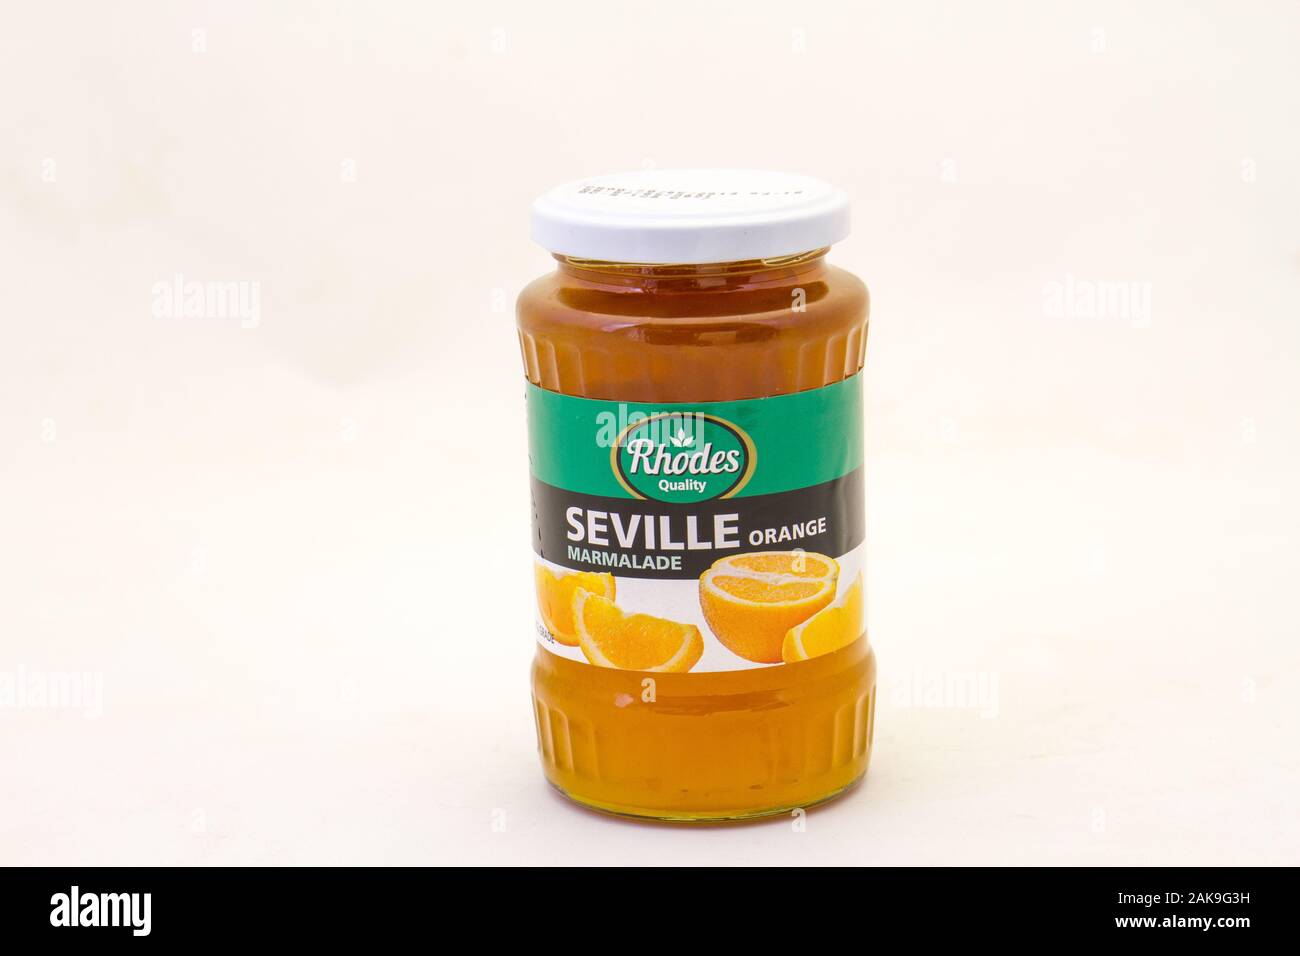 Alberton, South Africa - a jar of Rhodes Seville orange marmalade isolated on a clear background image in horizontal format with copy space Stock Photo